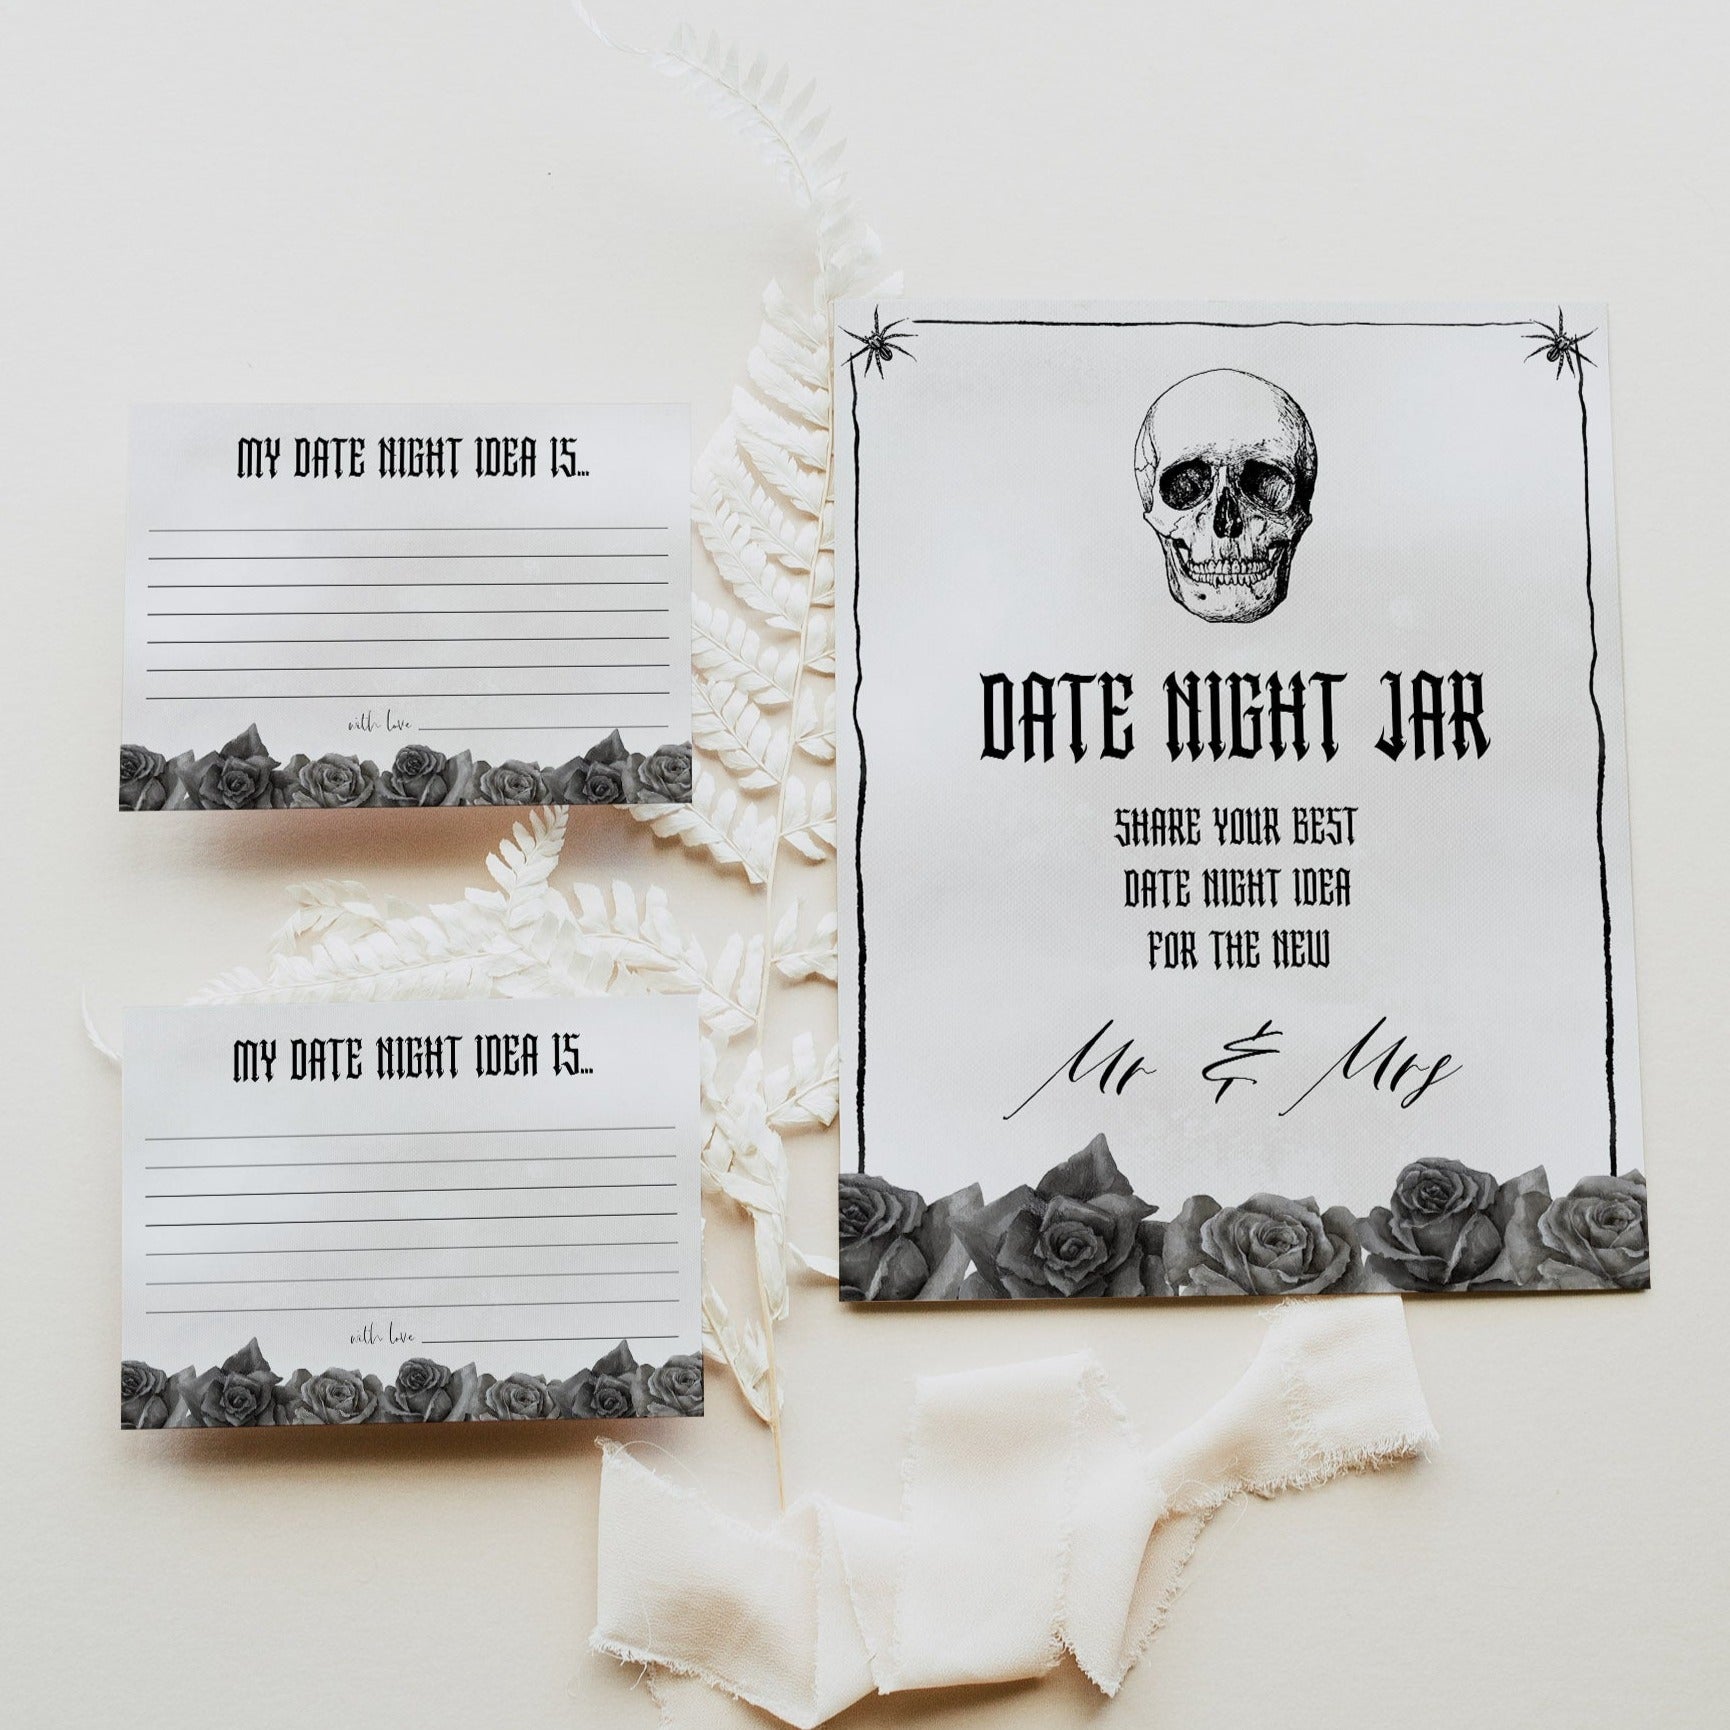 Fully editable and printable bridal shower date night jar game with a gothic design. Perfect for a Bride or Die or Death Us To Party bridal shower themed party